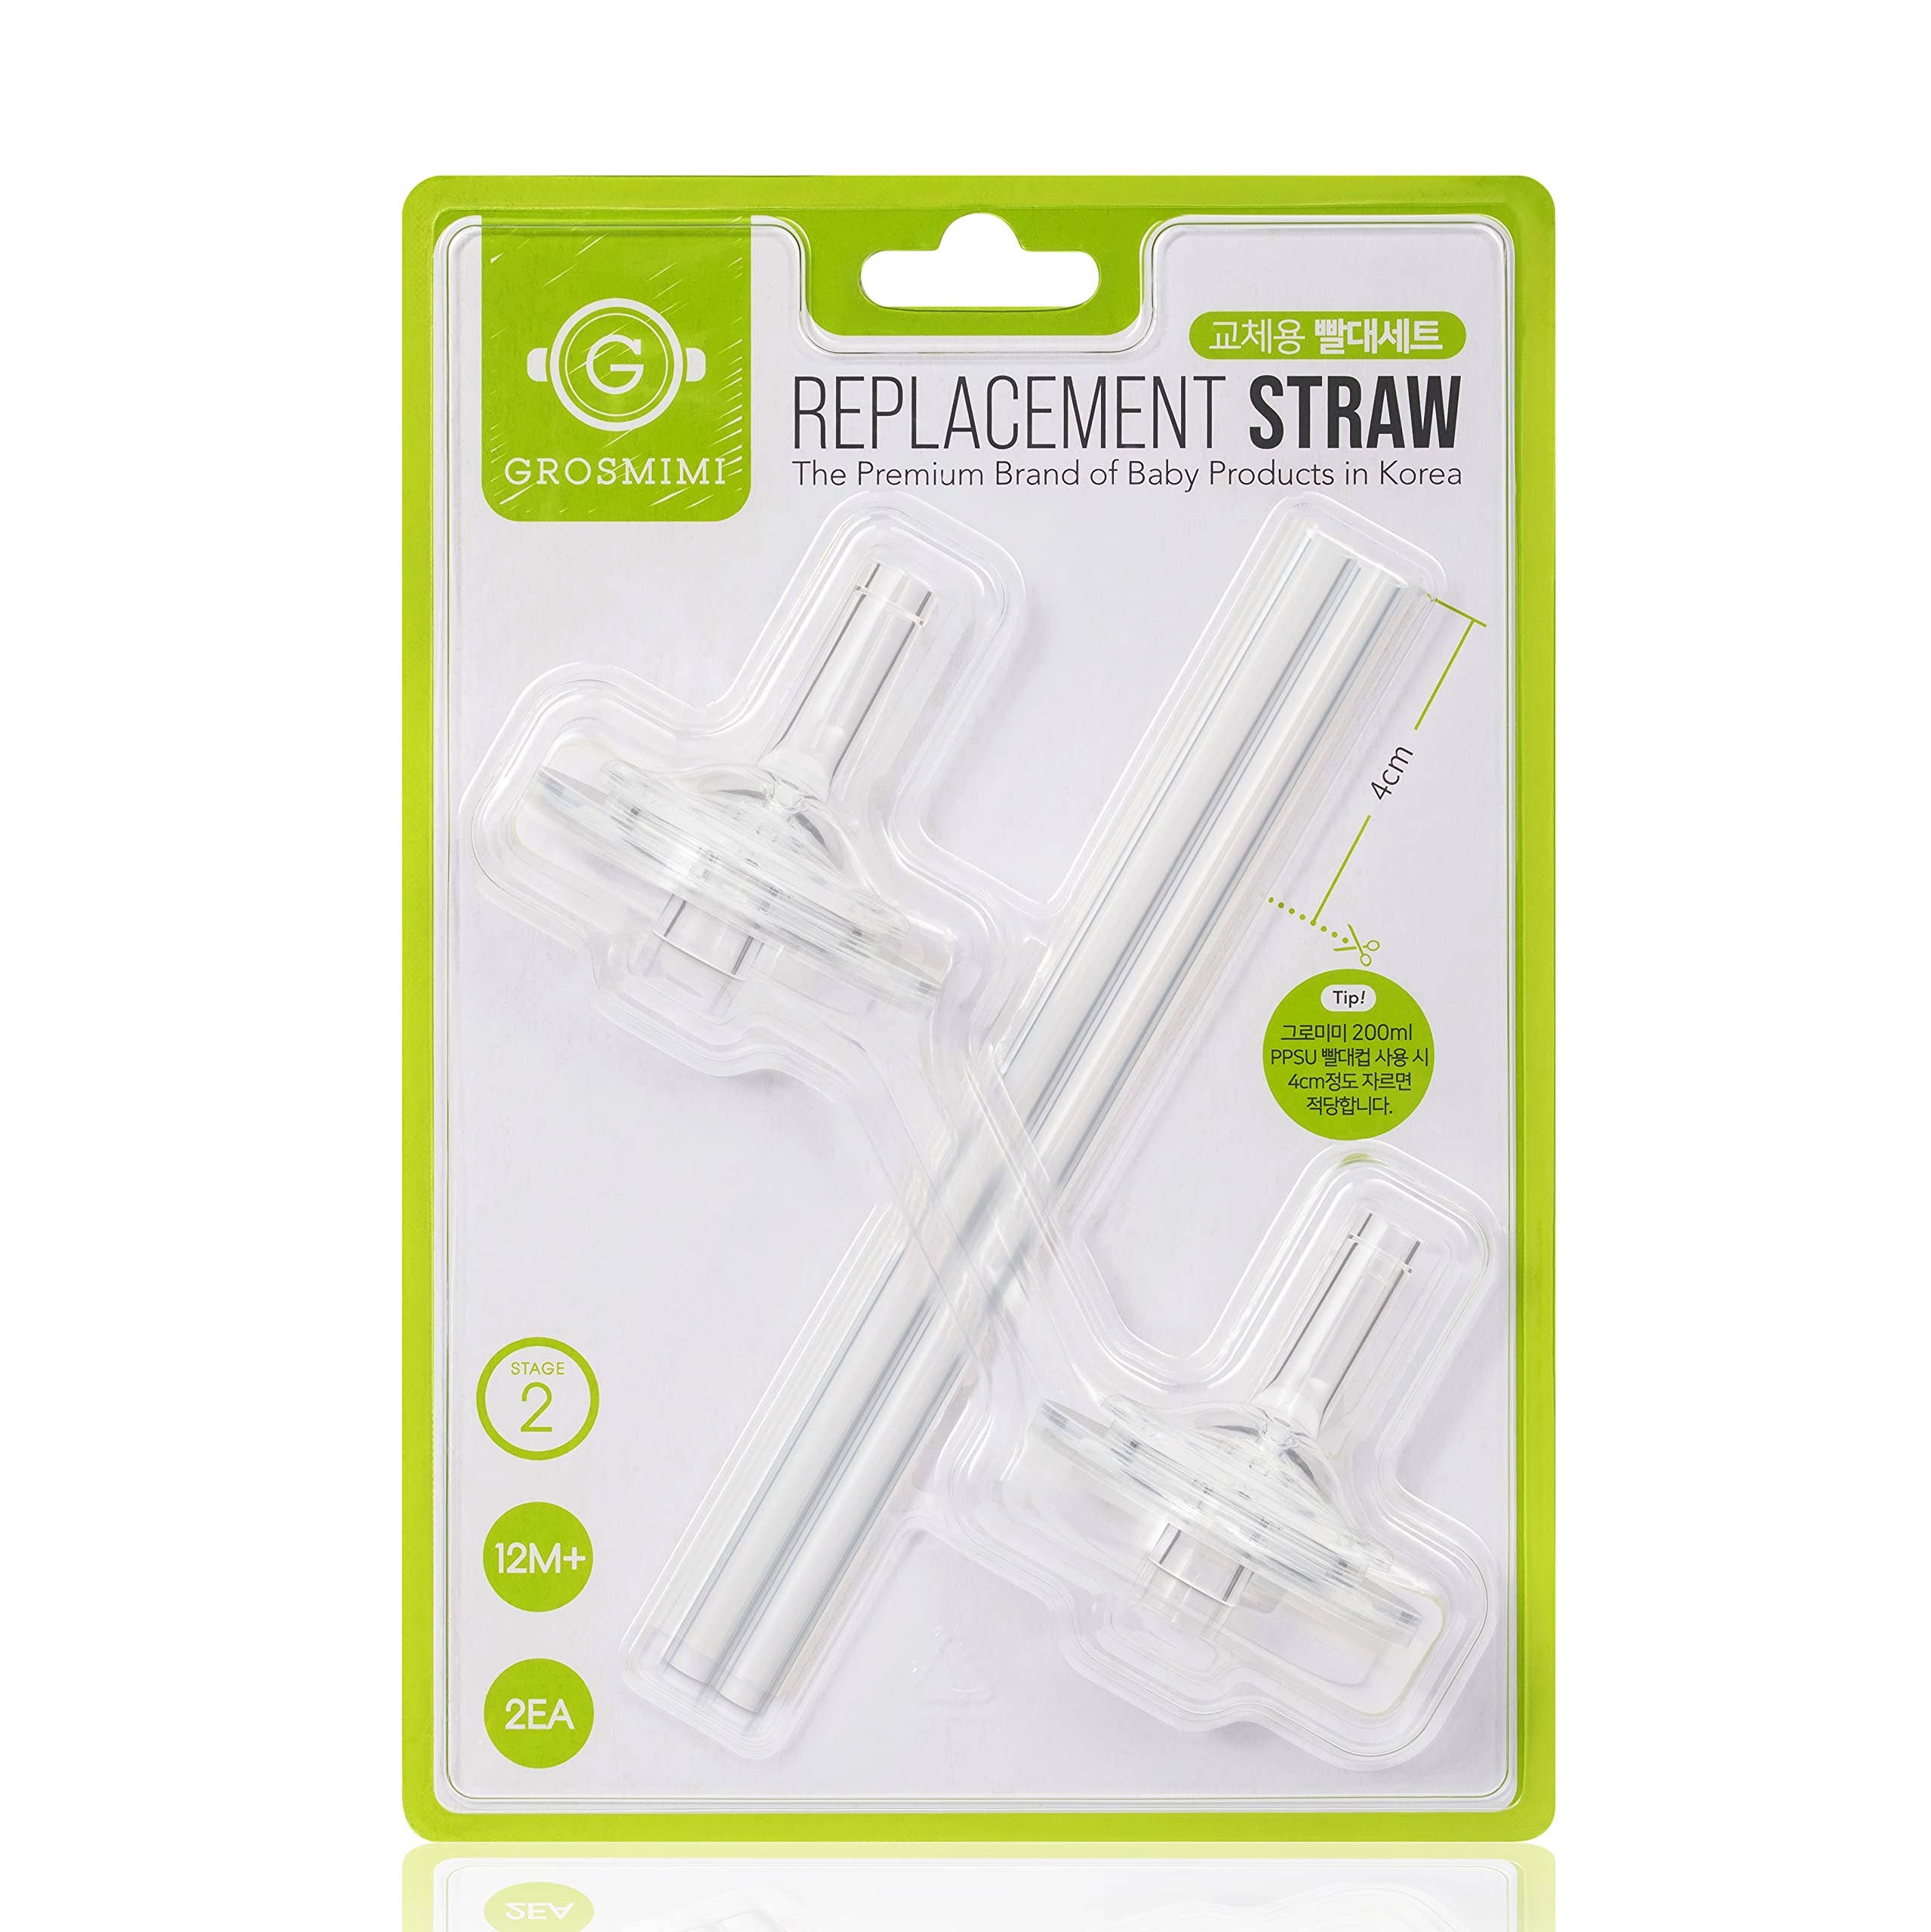 The best-selling Grosmimi Straw Cup will be among the items on